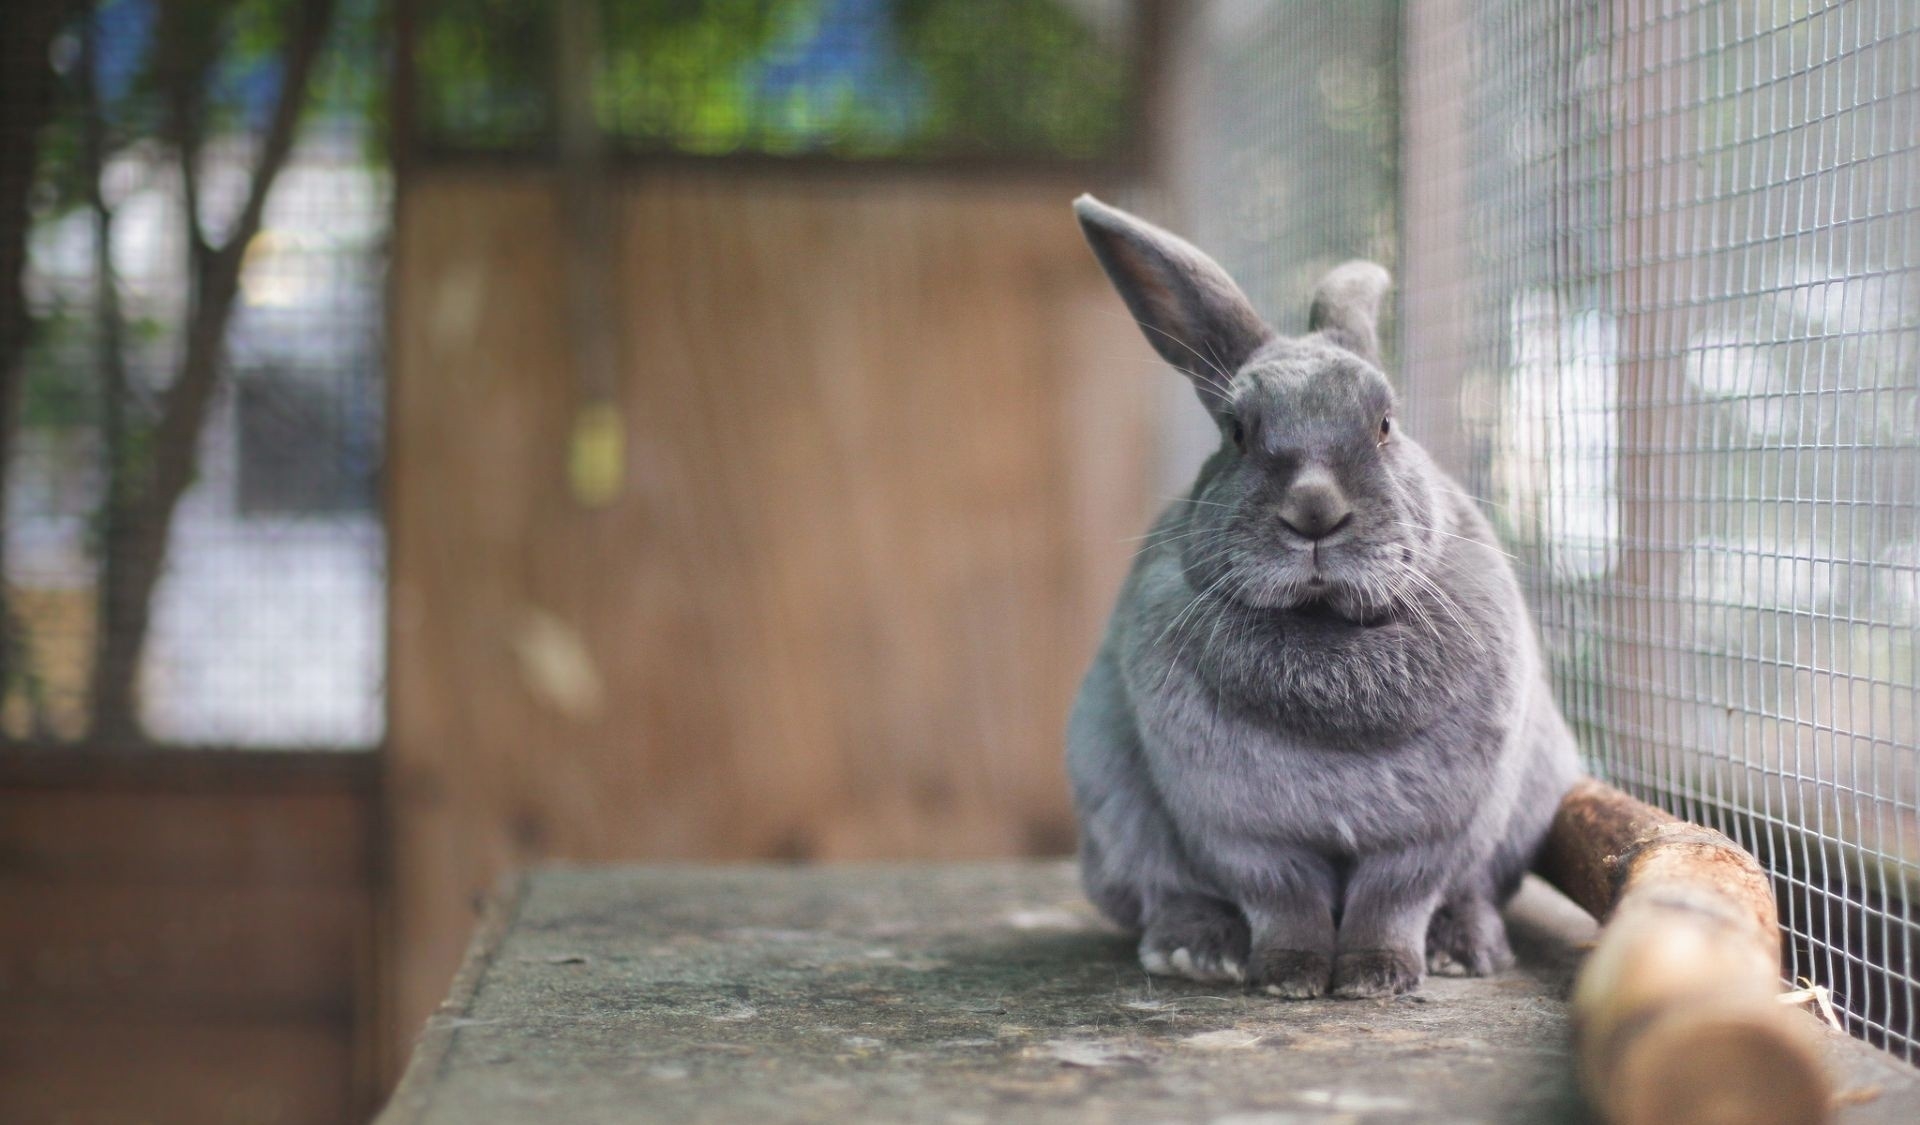 animals, sit, muzzle, cell, cage, rabbit